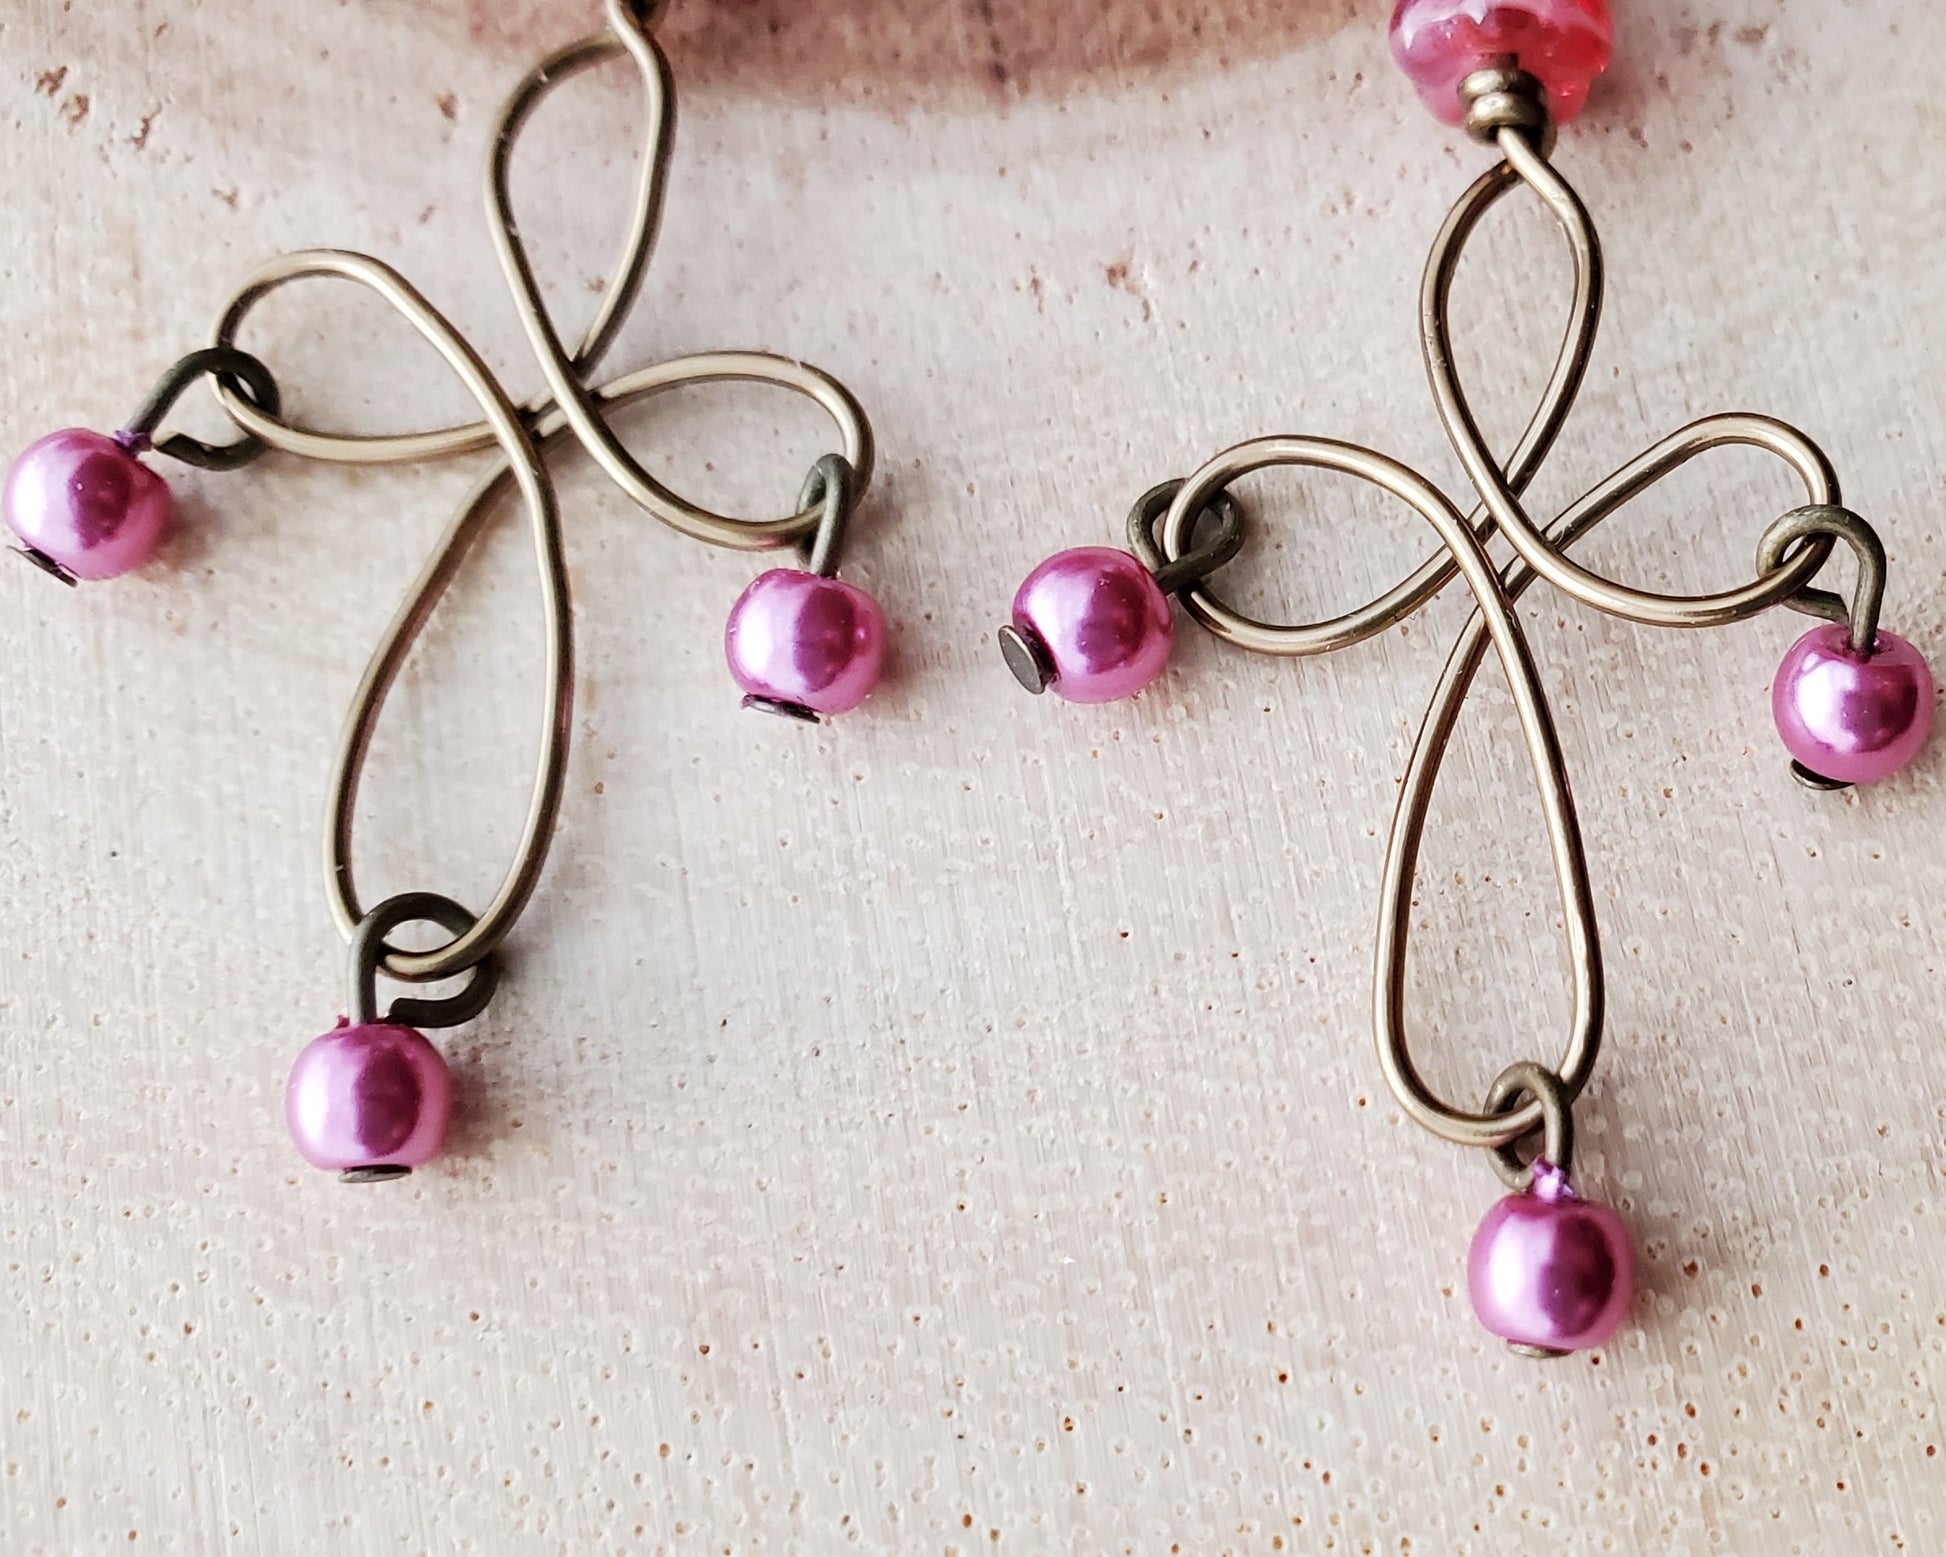 Long Pink Floral Cross Earrings, Vintage Inspired with Large Hand forged Antique Brass Cross, pink Pearls and Flowers with leaver back earring hooks